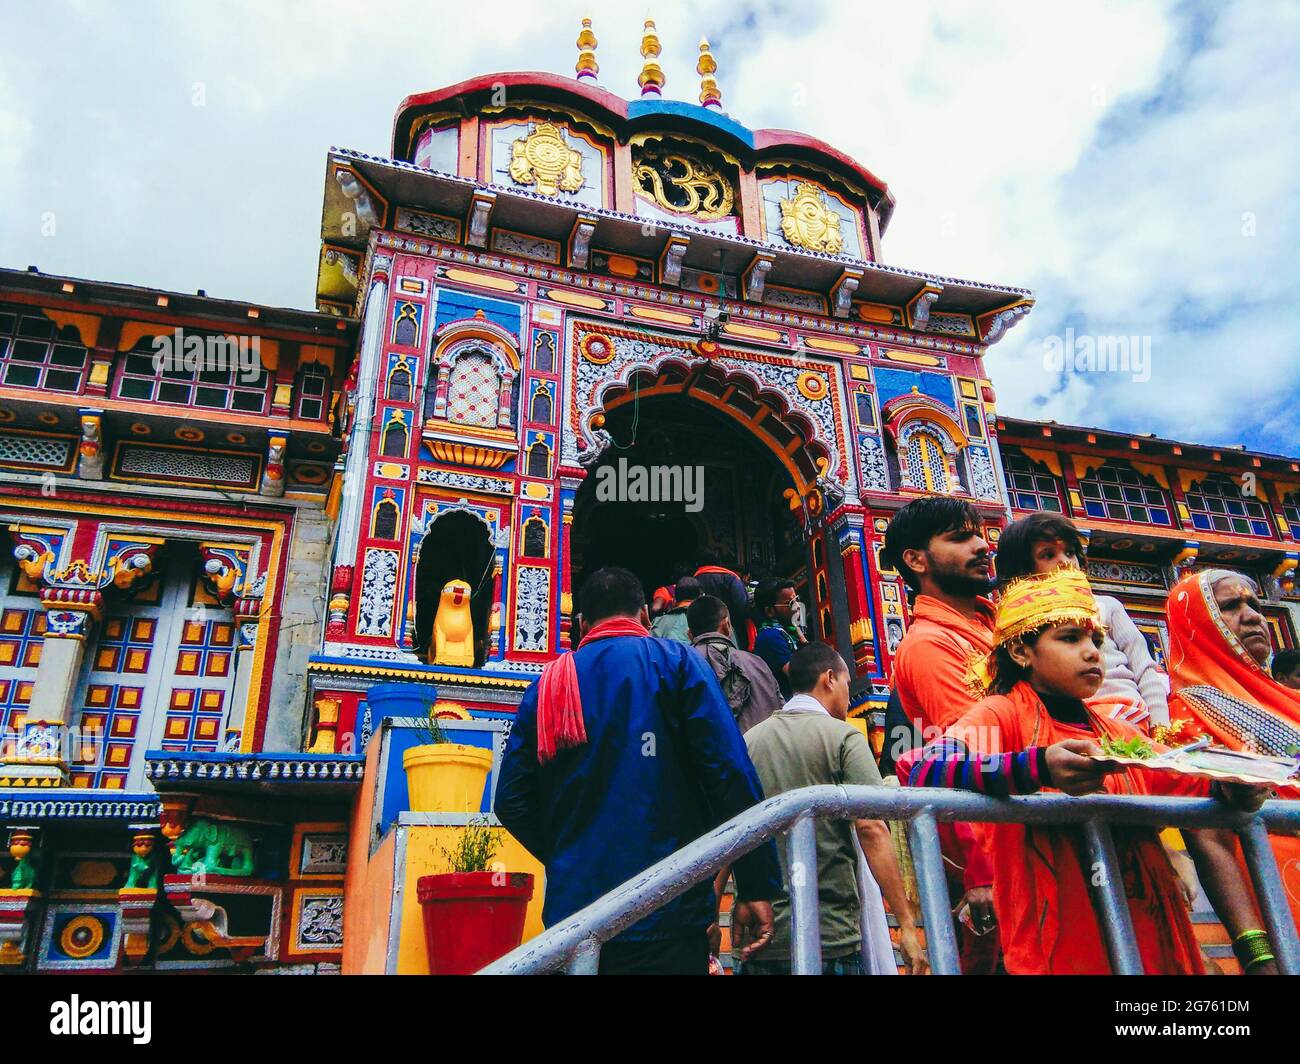 BADRINATH, INDIA - Jul 18, 2017: People waiting for their turns outside at Badrinath Temple Stock Photo